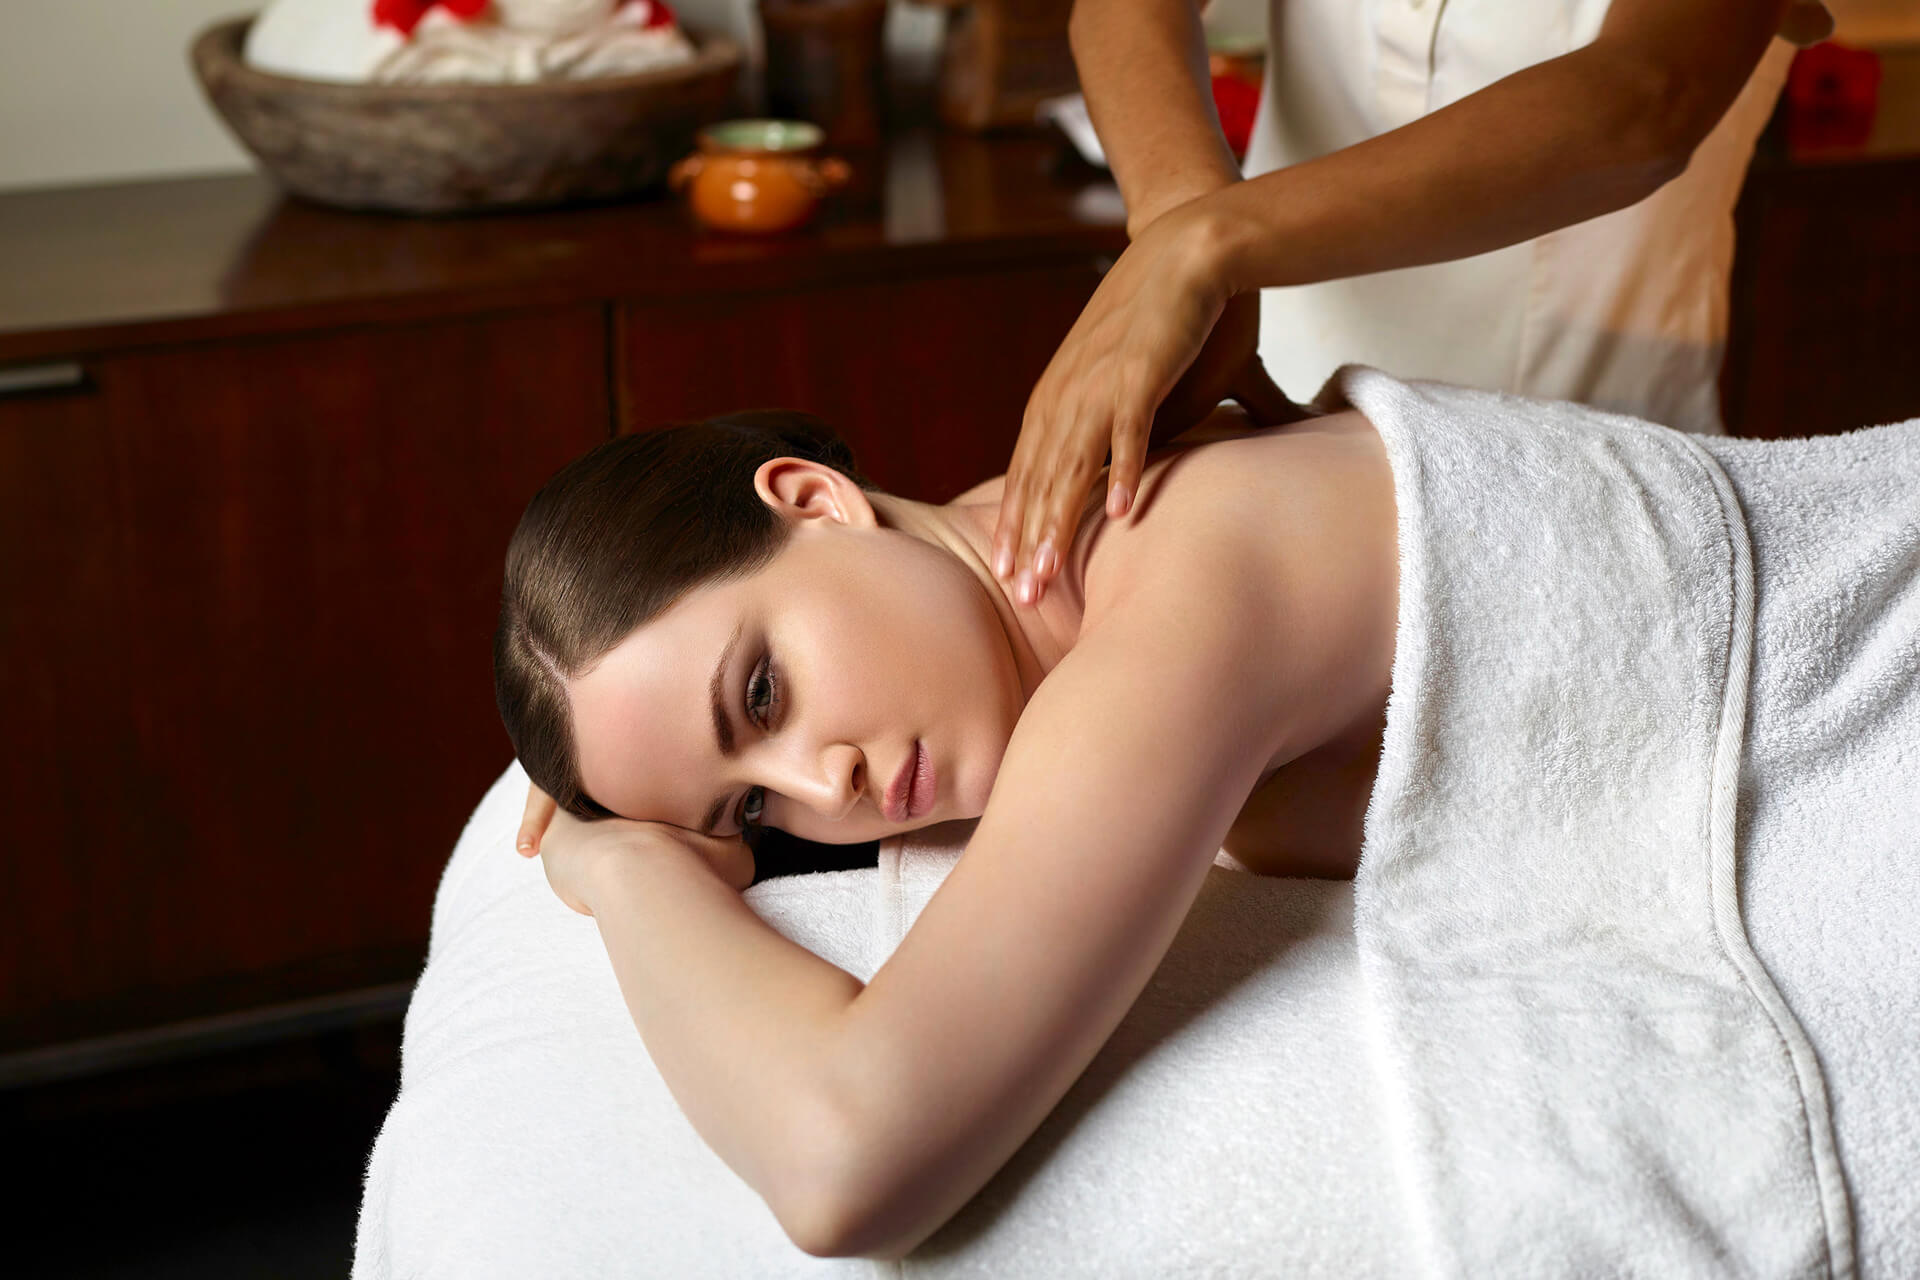 What are the Benefits of the Spa?